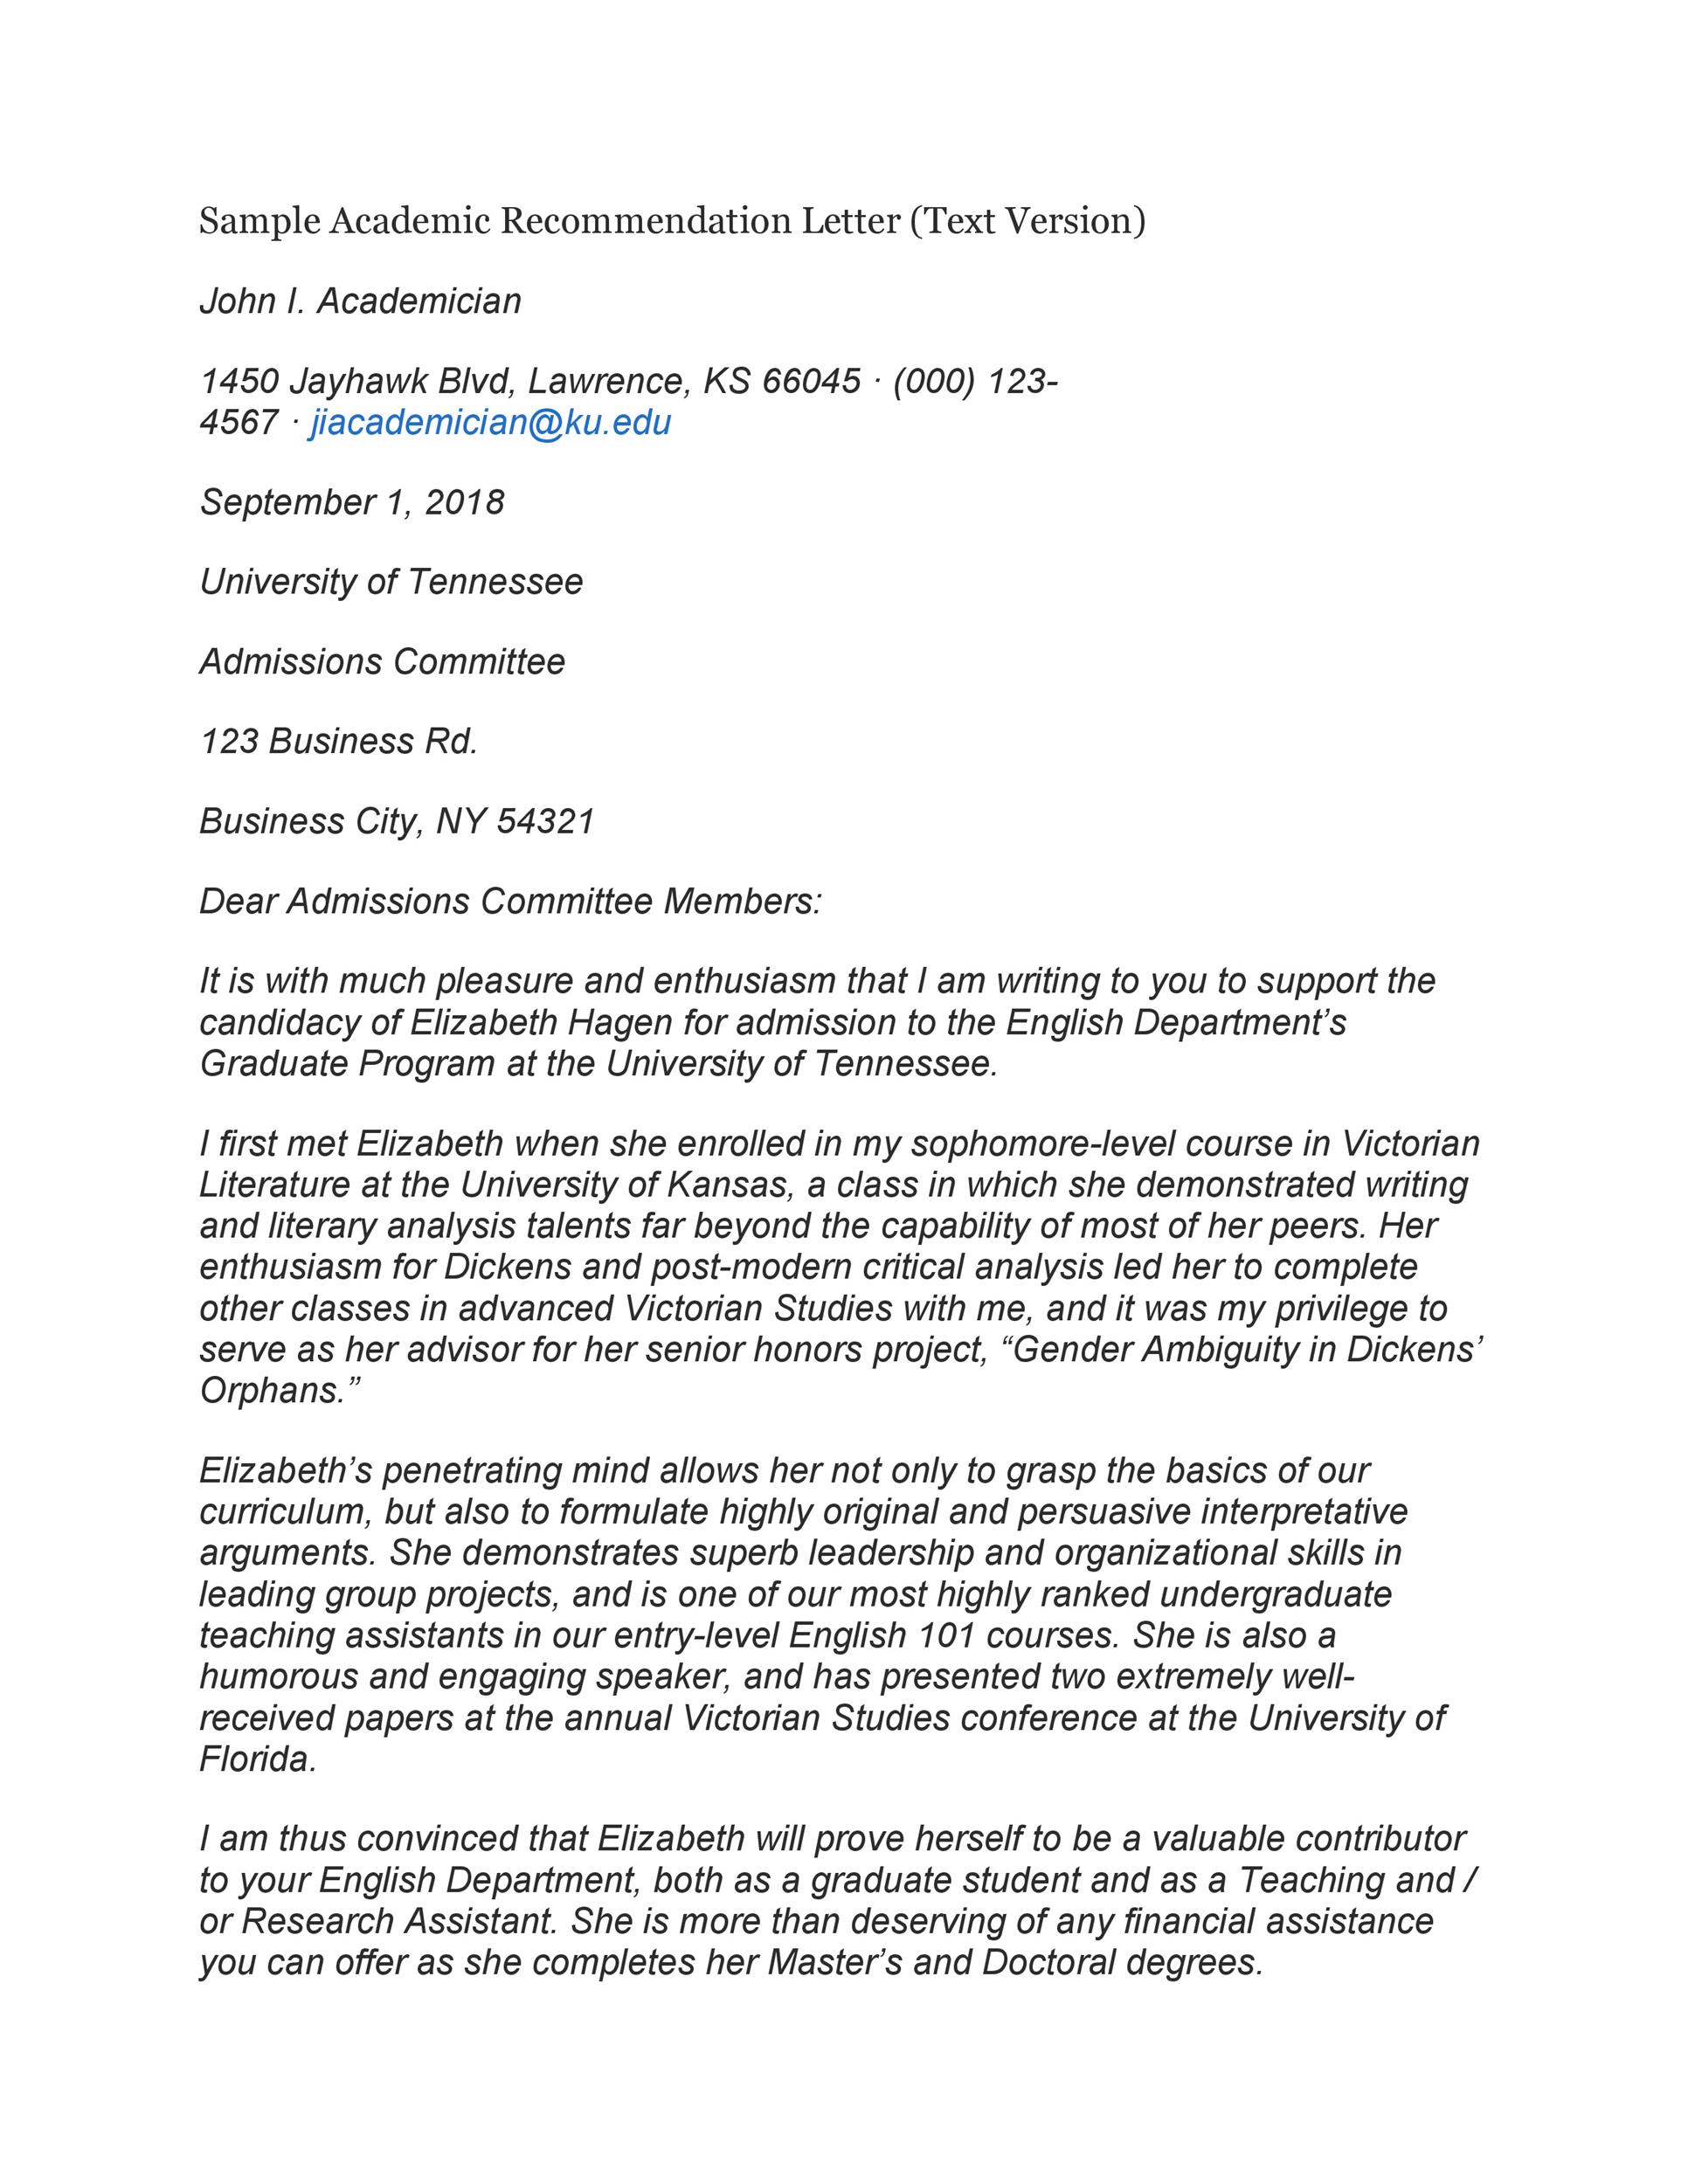 Recommendation letter for student admission